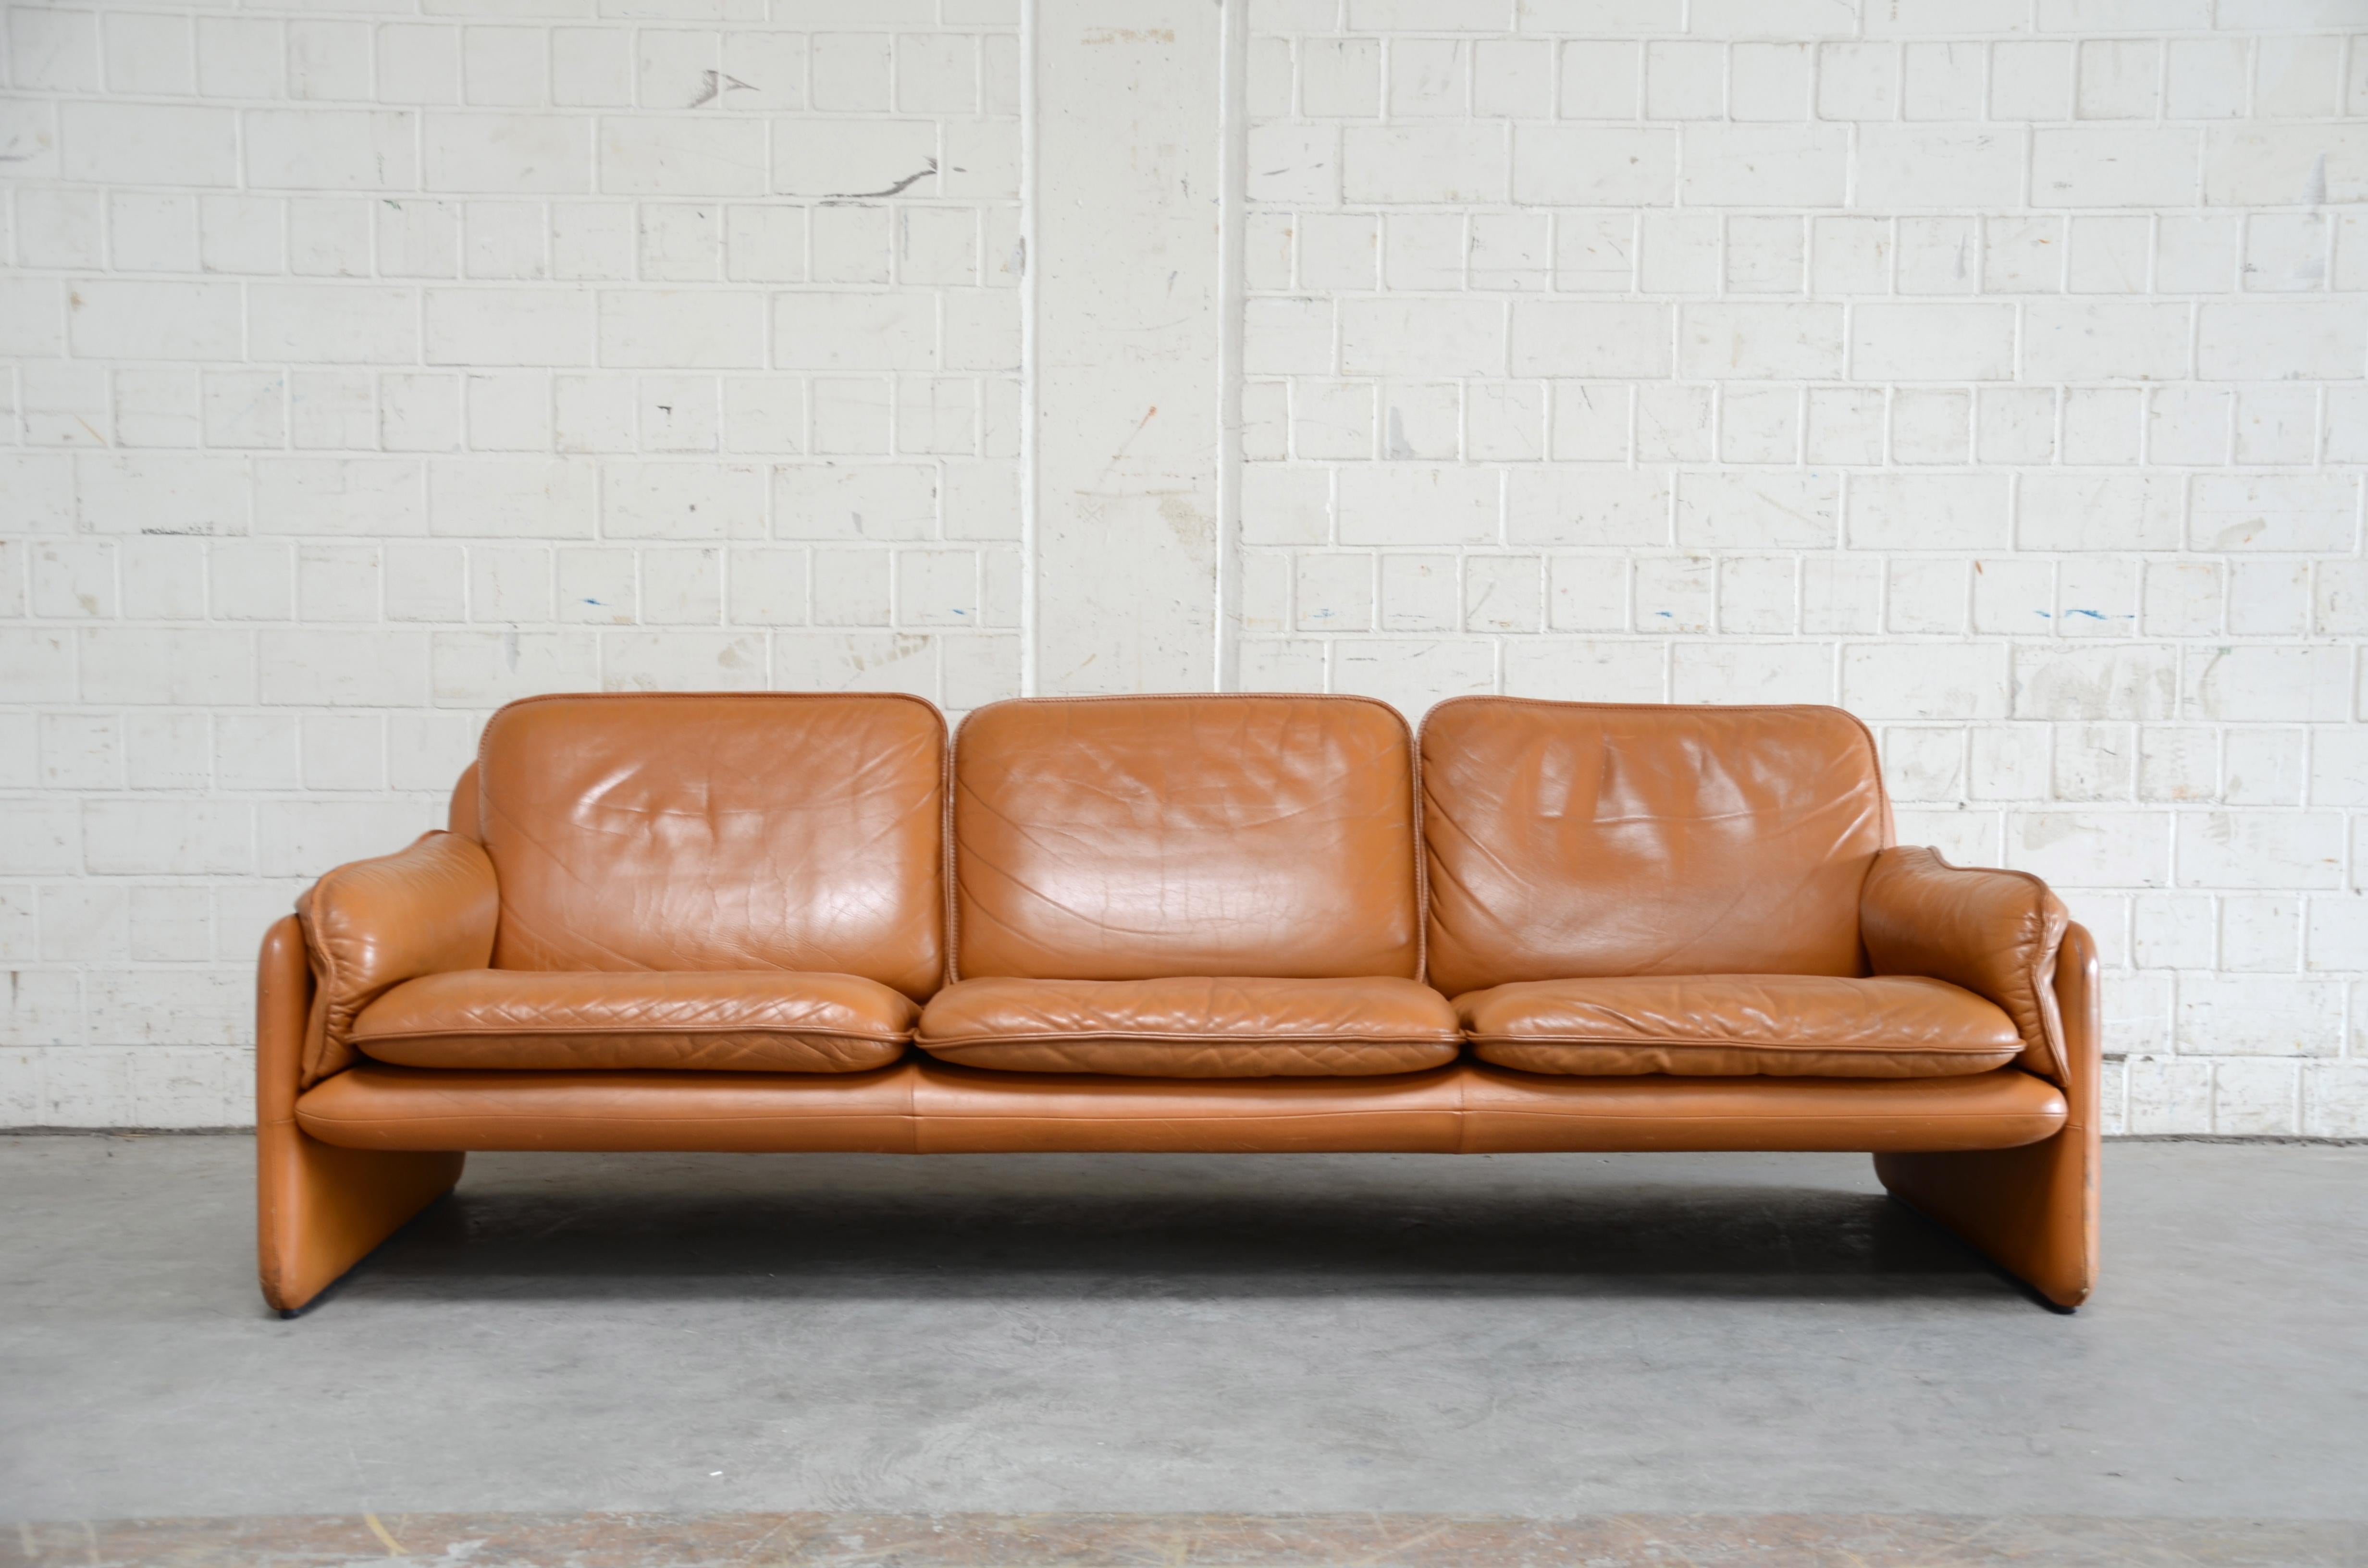 De Sede Ds 61 leather sofa in cognac color.
The leather surface has been refinished, 
The leather has been previously redyed.
De Sede is known for best leather craftman quality from Switzerland.
 